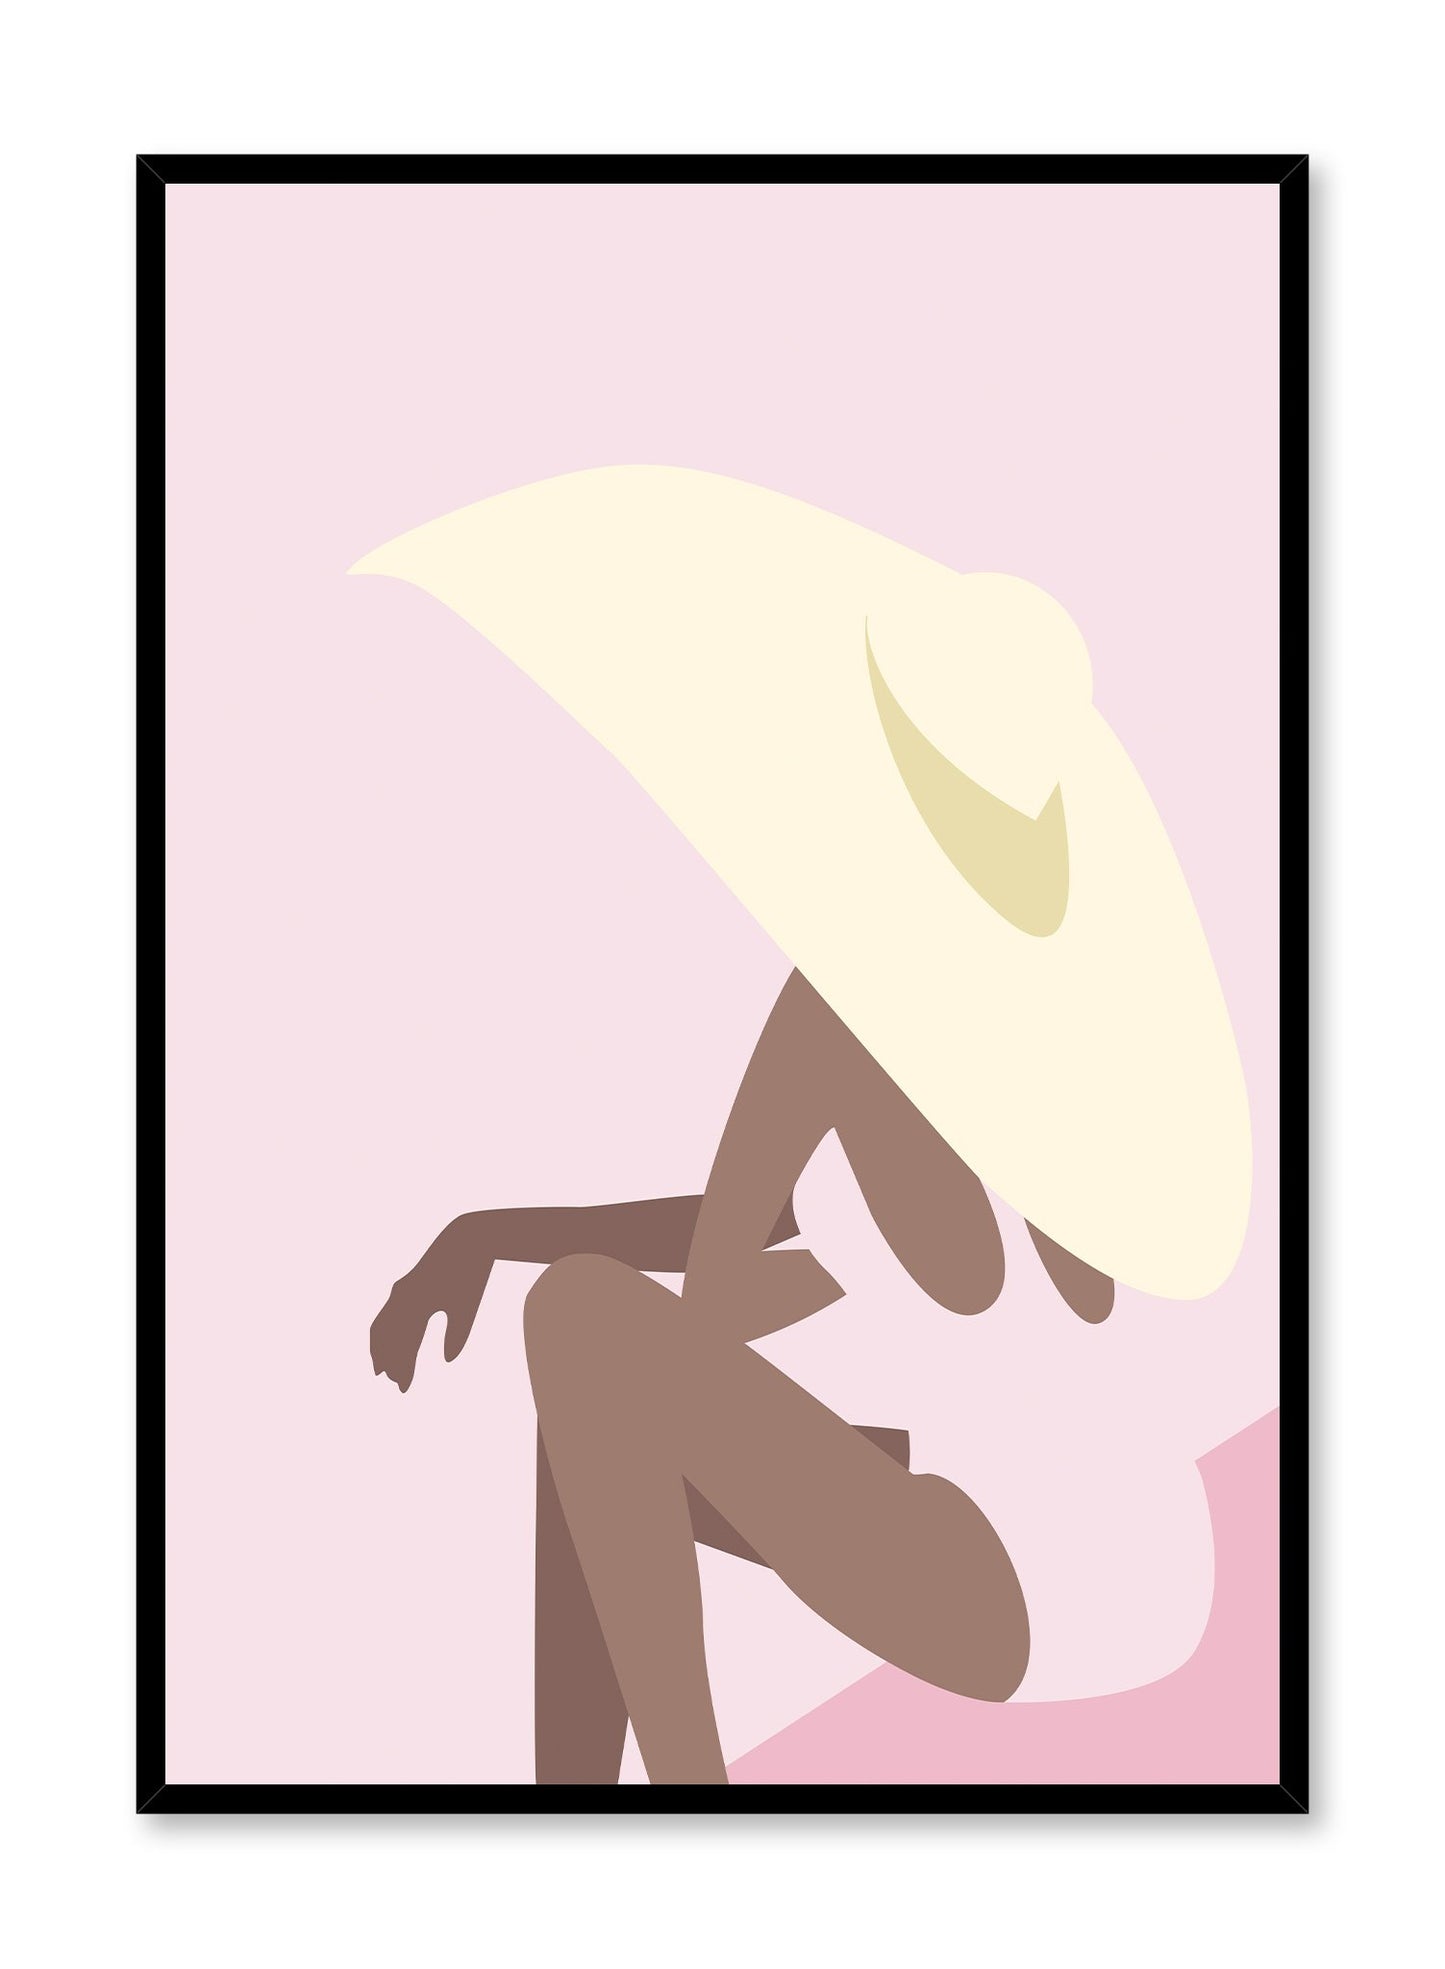 Poolside Diva is a minimalist illustration poster of a woman sitting and wearing a large sunhat by Opposite Wall.